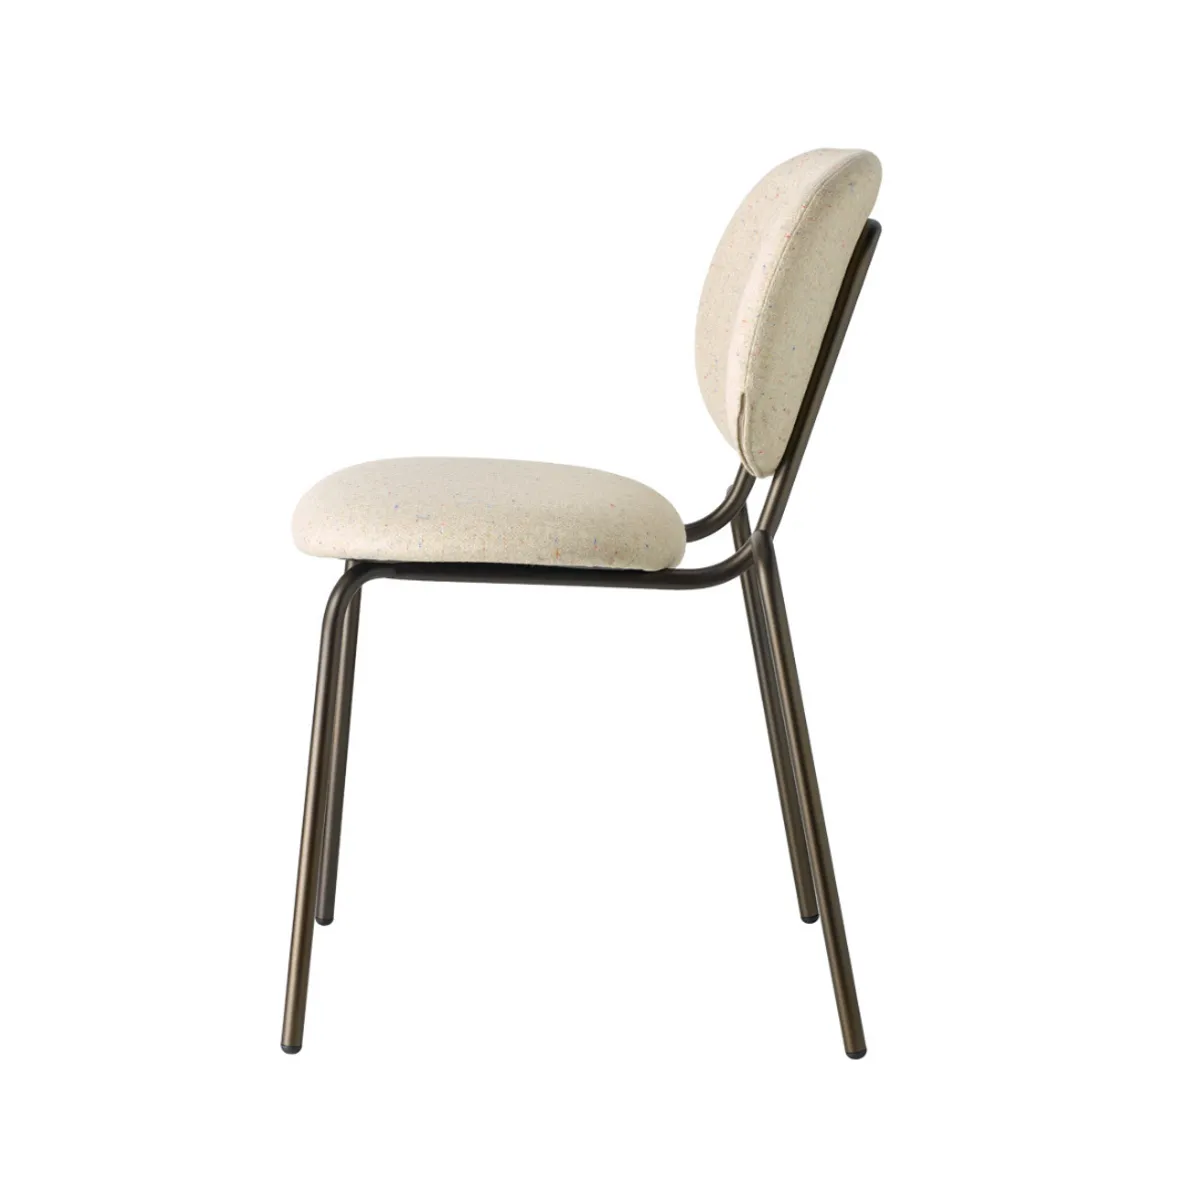 Layla soft side chair 6